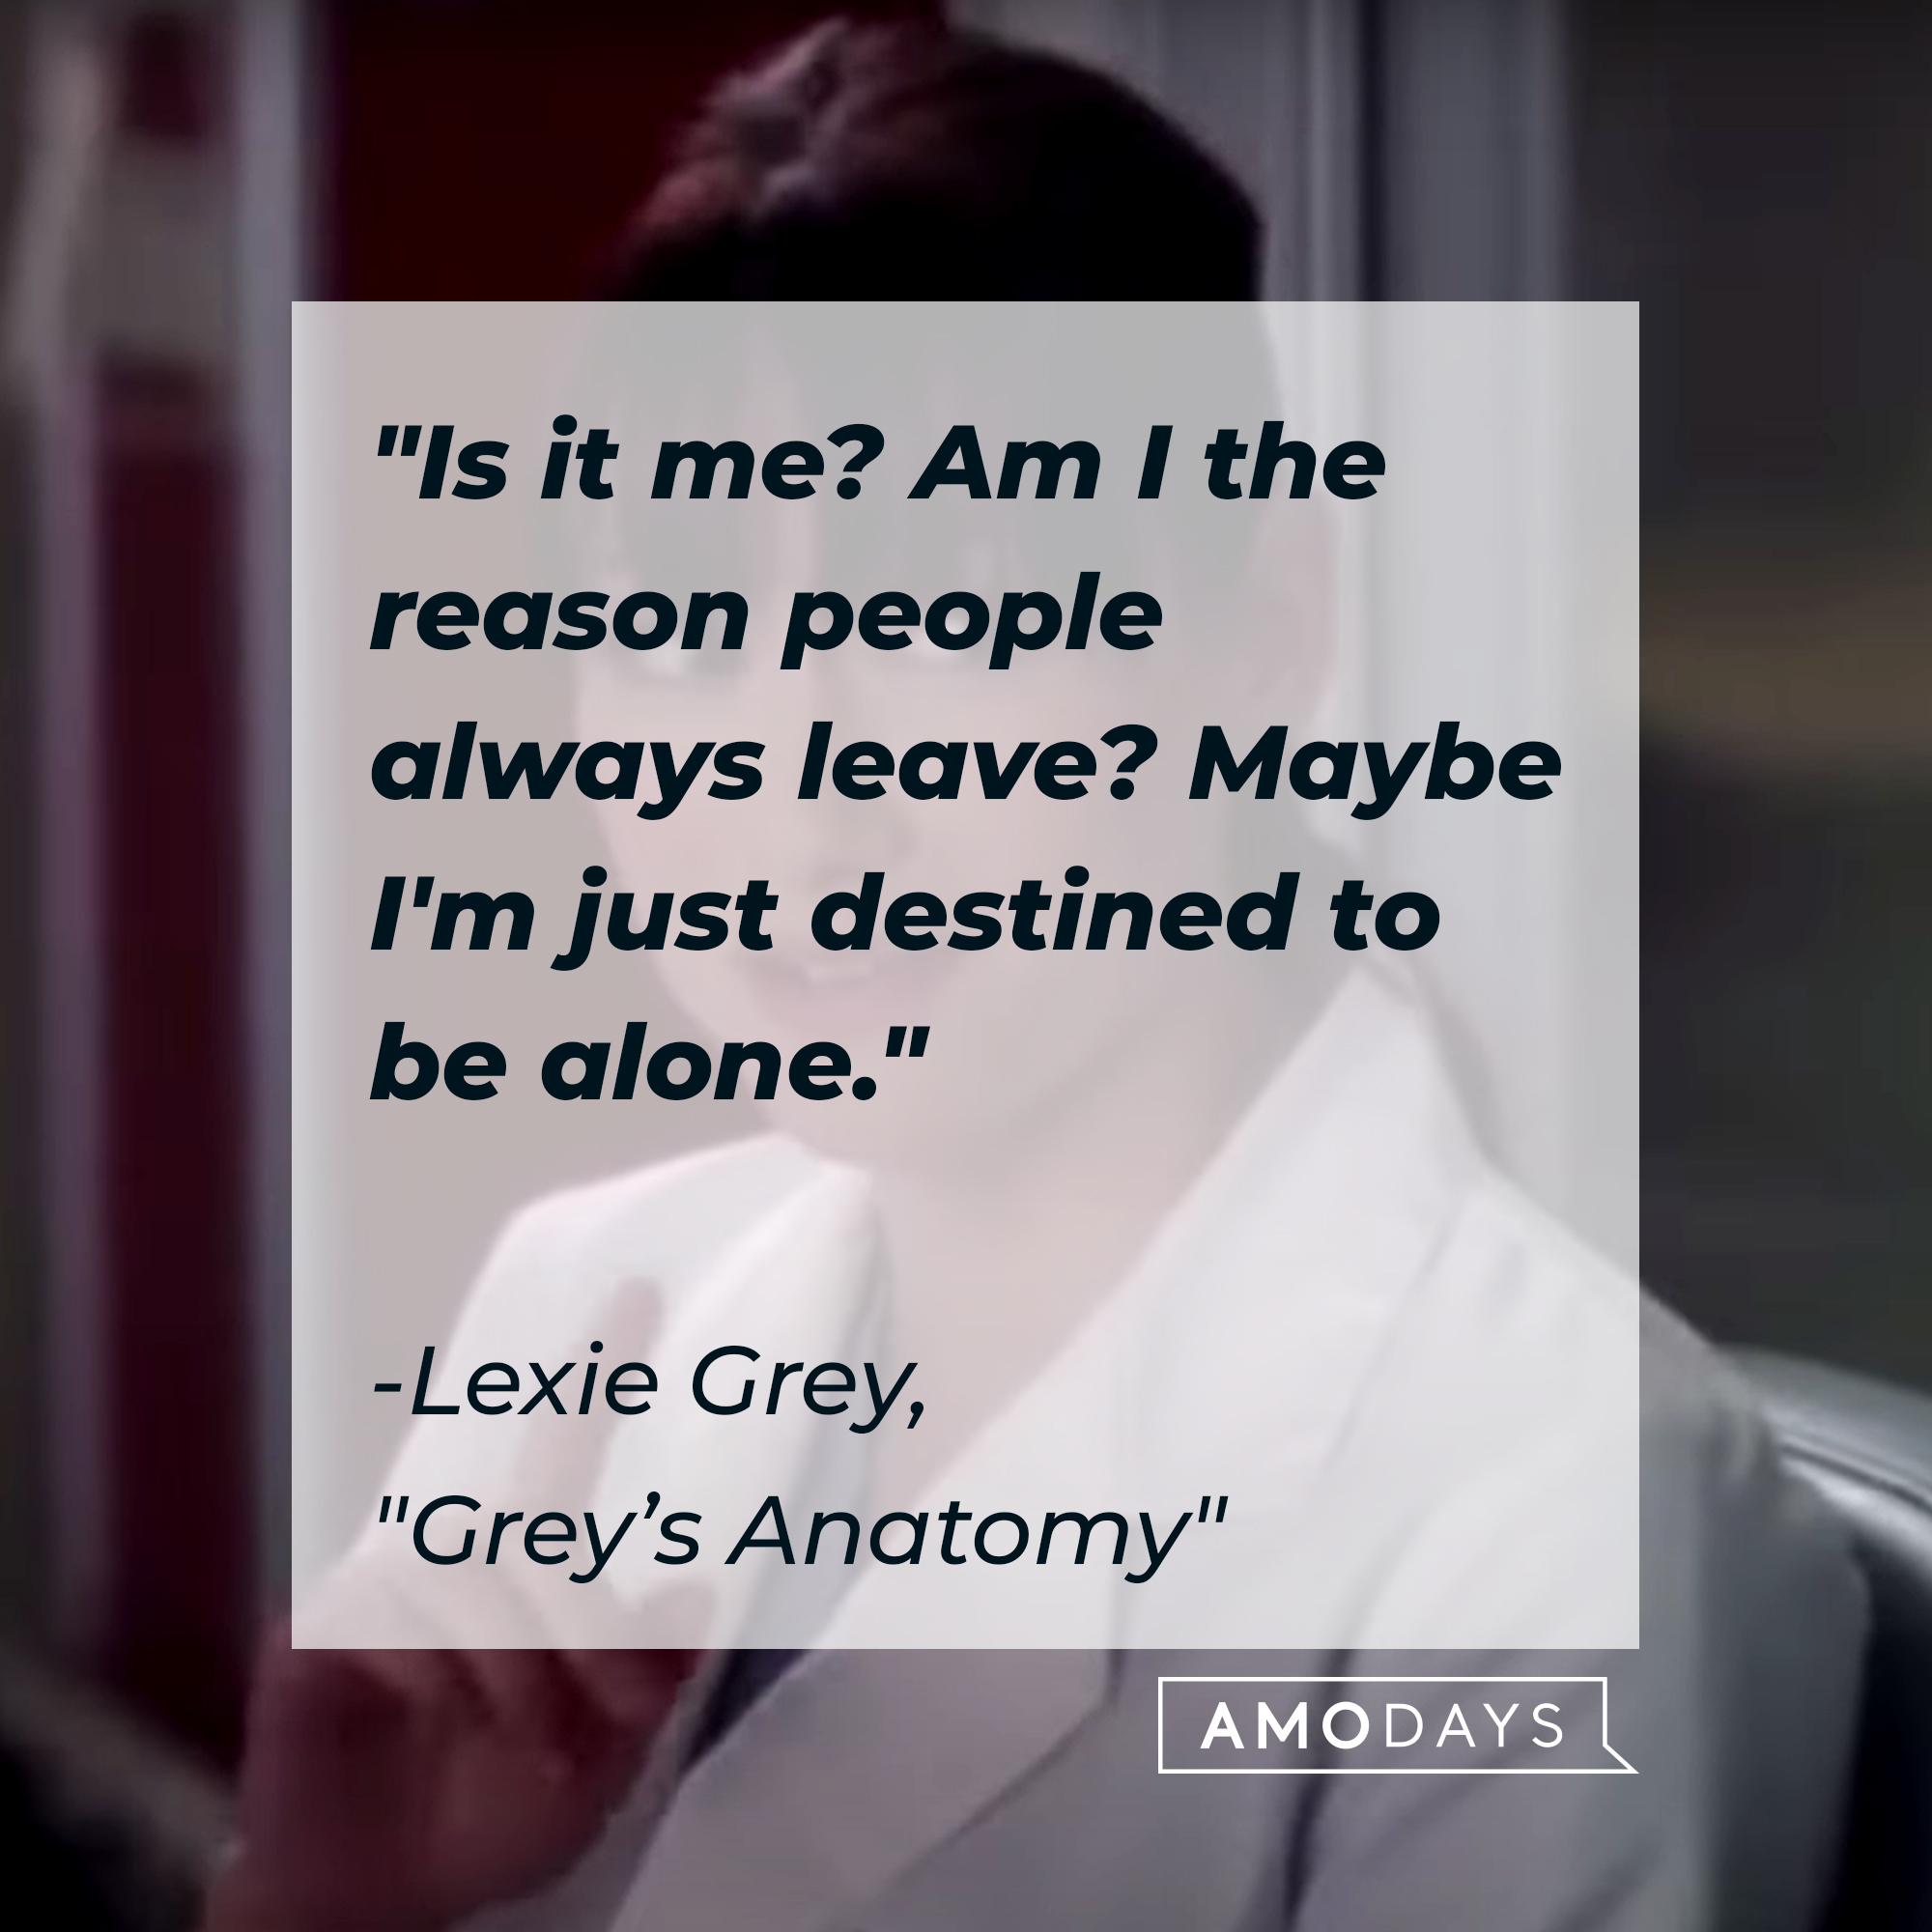 Lexie Grey with her quote: "Is it me? Am I the reason people always leave? Maybe I'm just destined to be alone." | Source: Facebook.com/GreysAnatomy